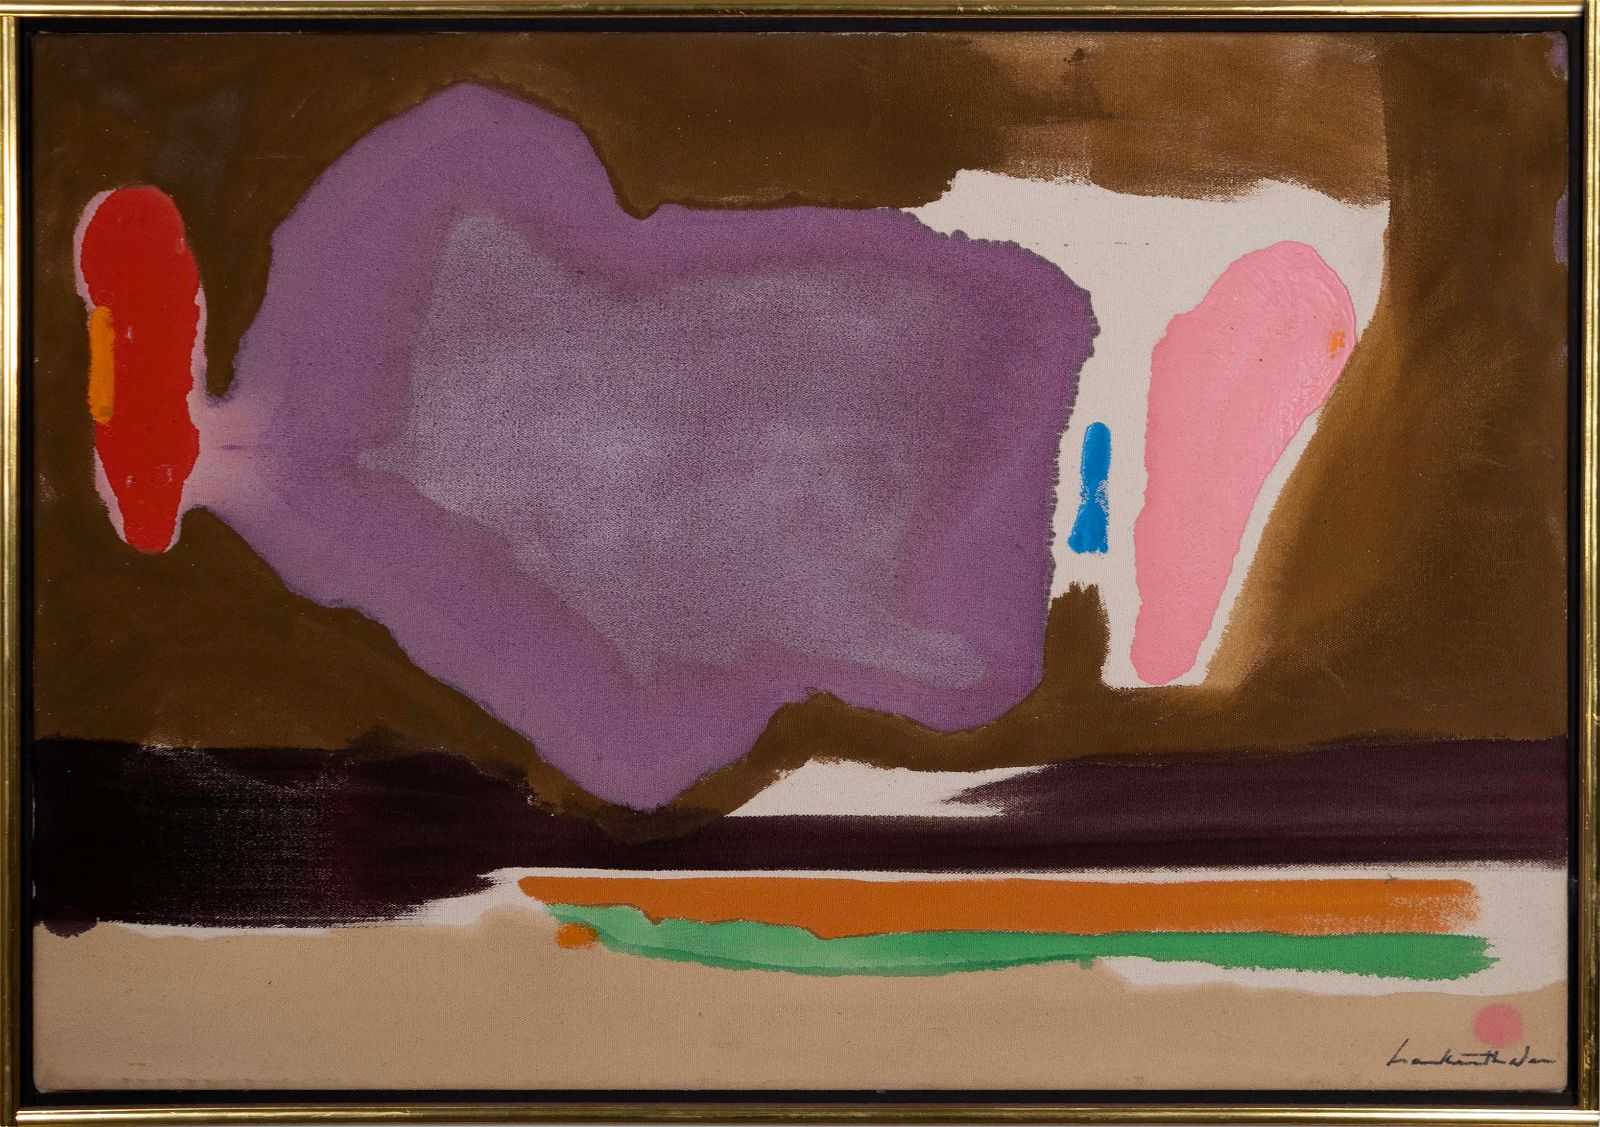 ‘East,’ a 1974 Color Field painting by Helen Frankenthaler, which hammered for $230,000 and sold for $292,100 at Le Shoppe Auction House.